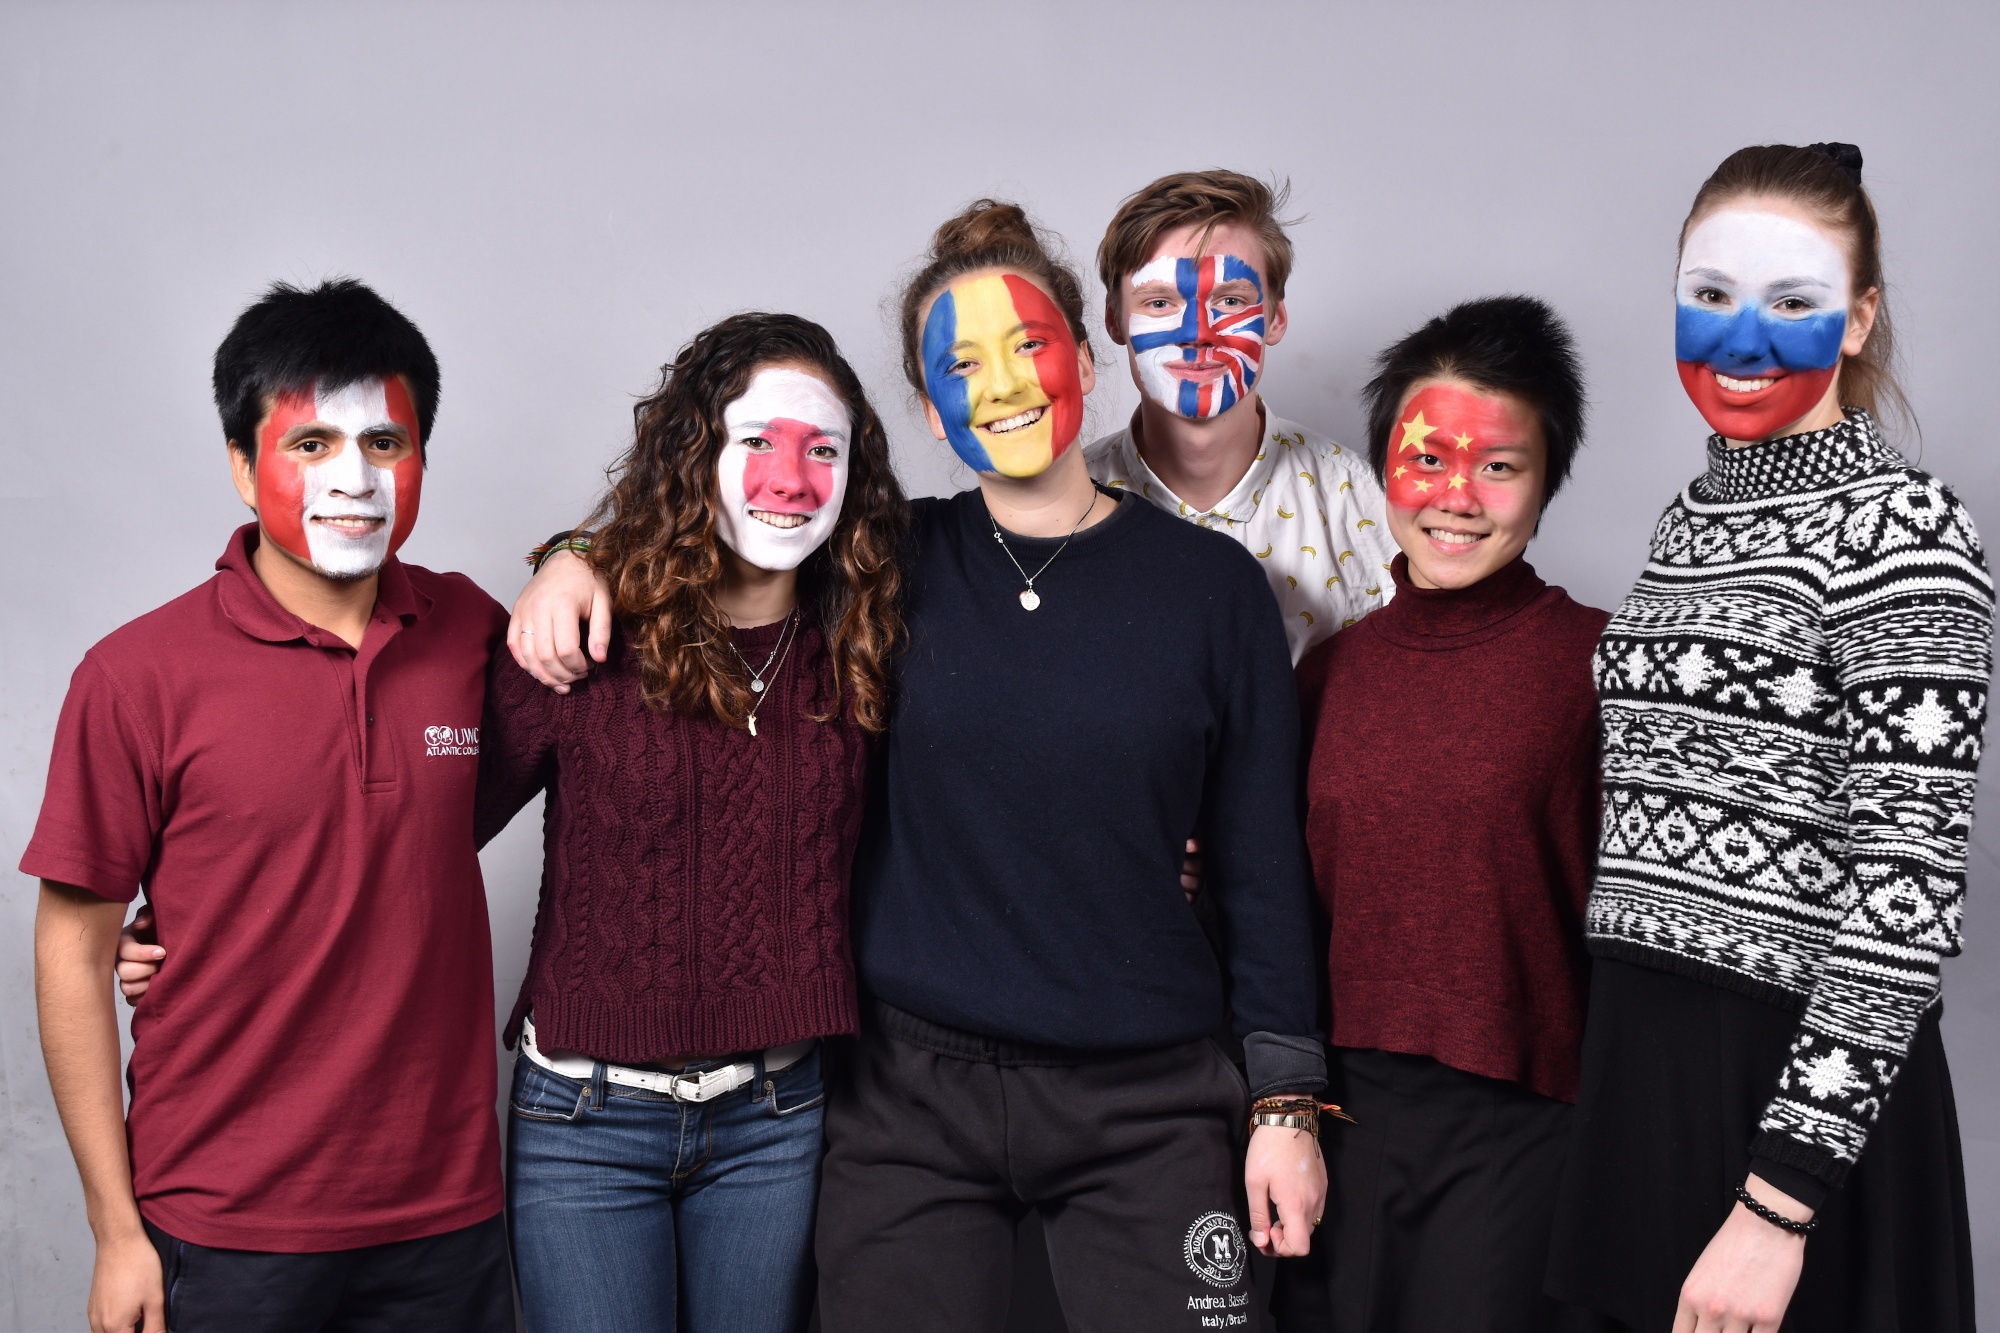 UWC students with their nation's flags painted on their faces.